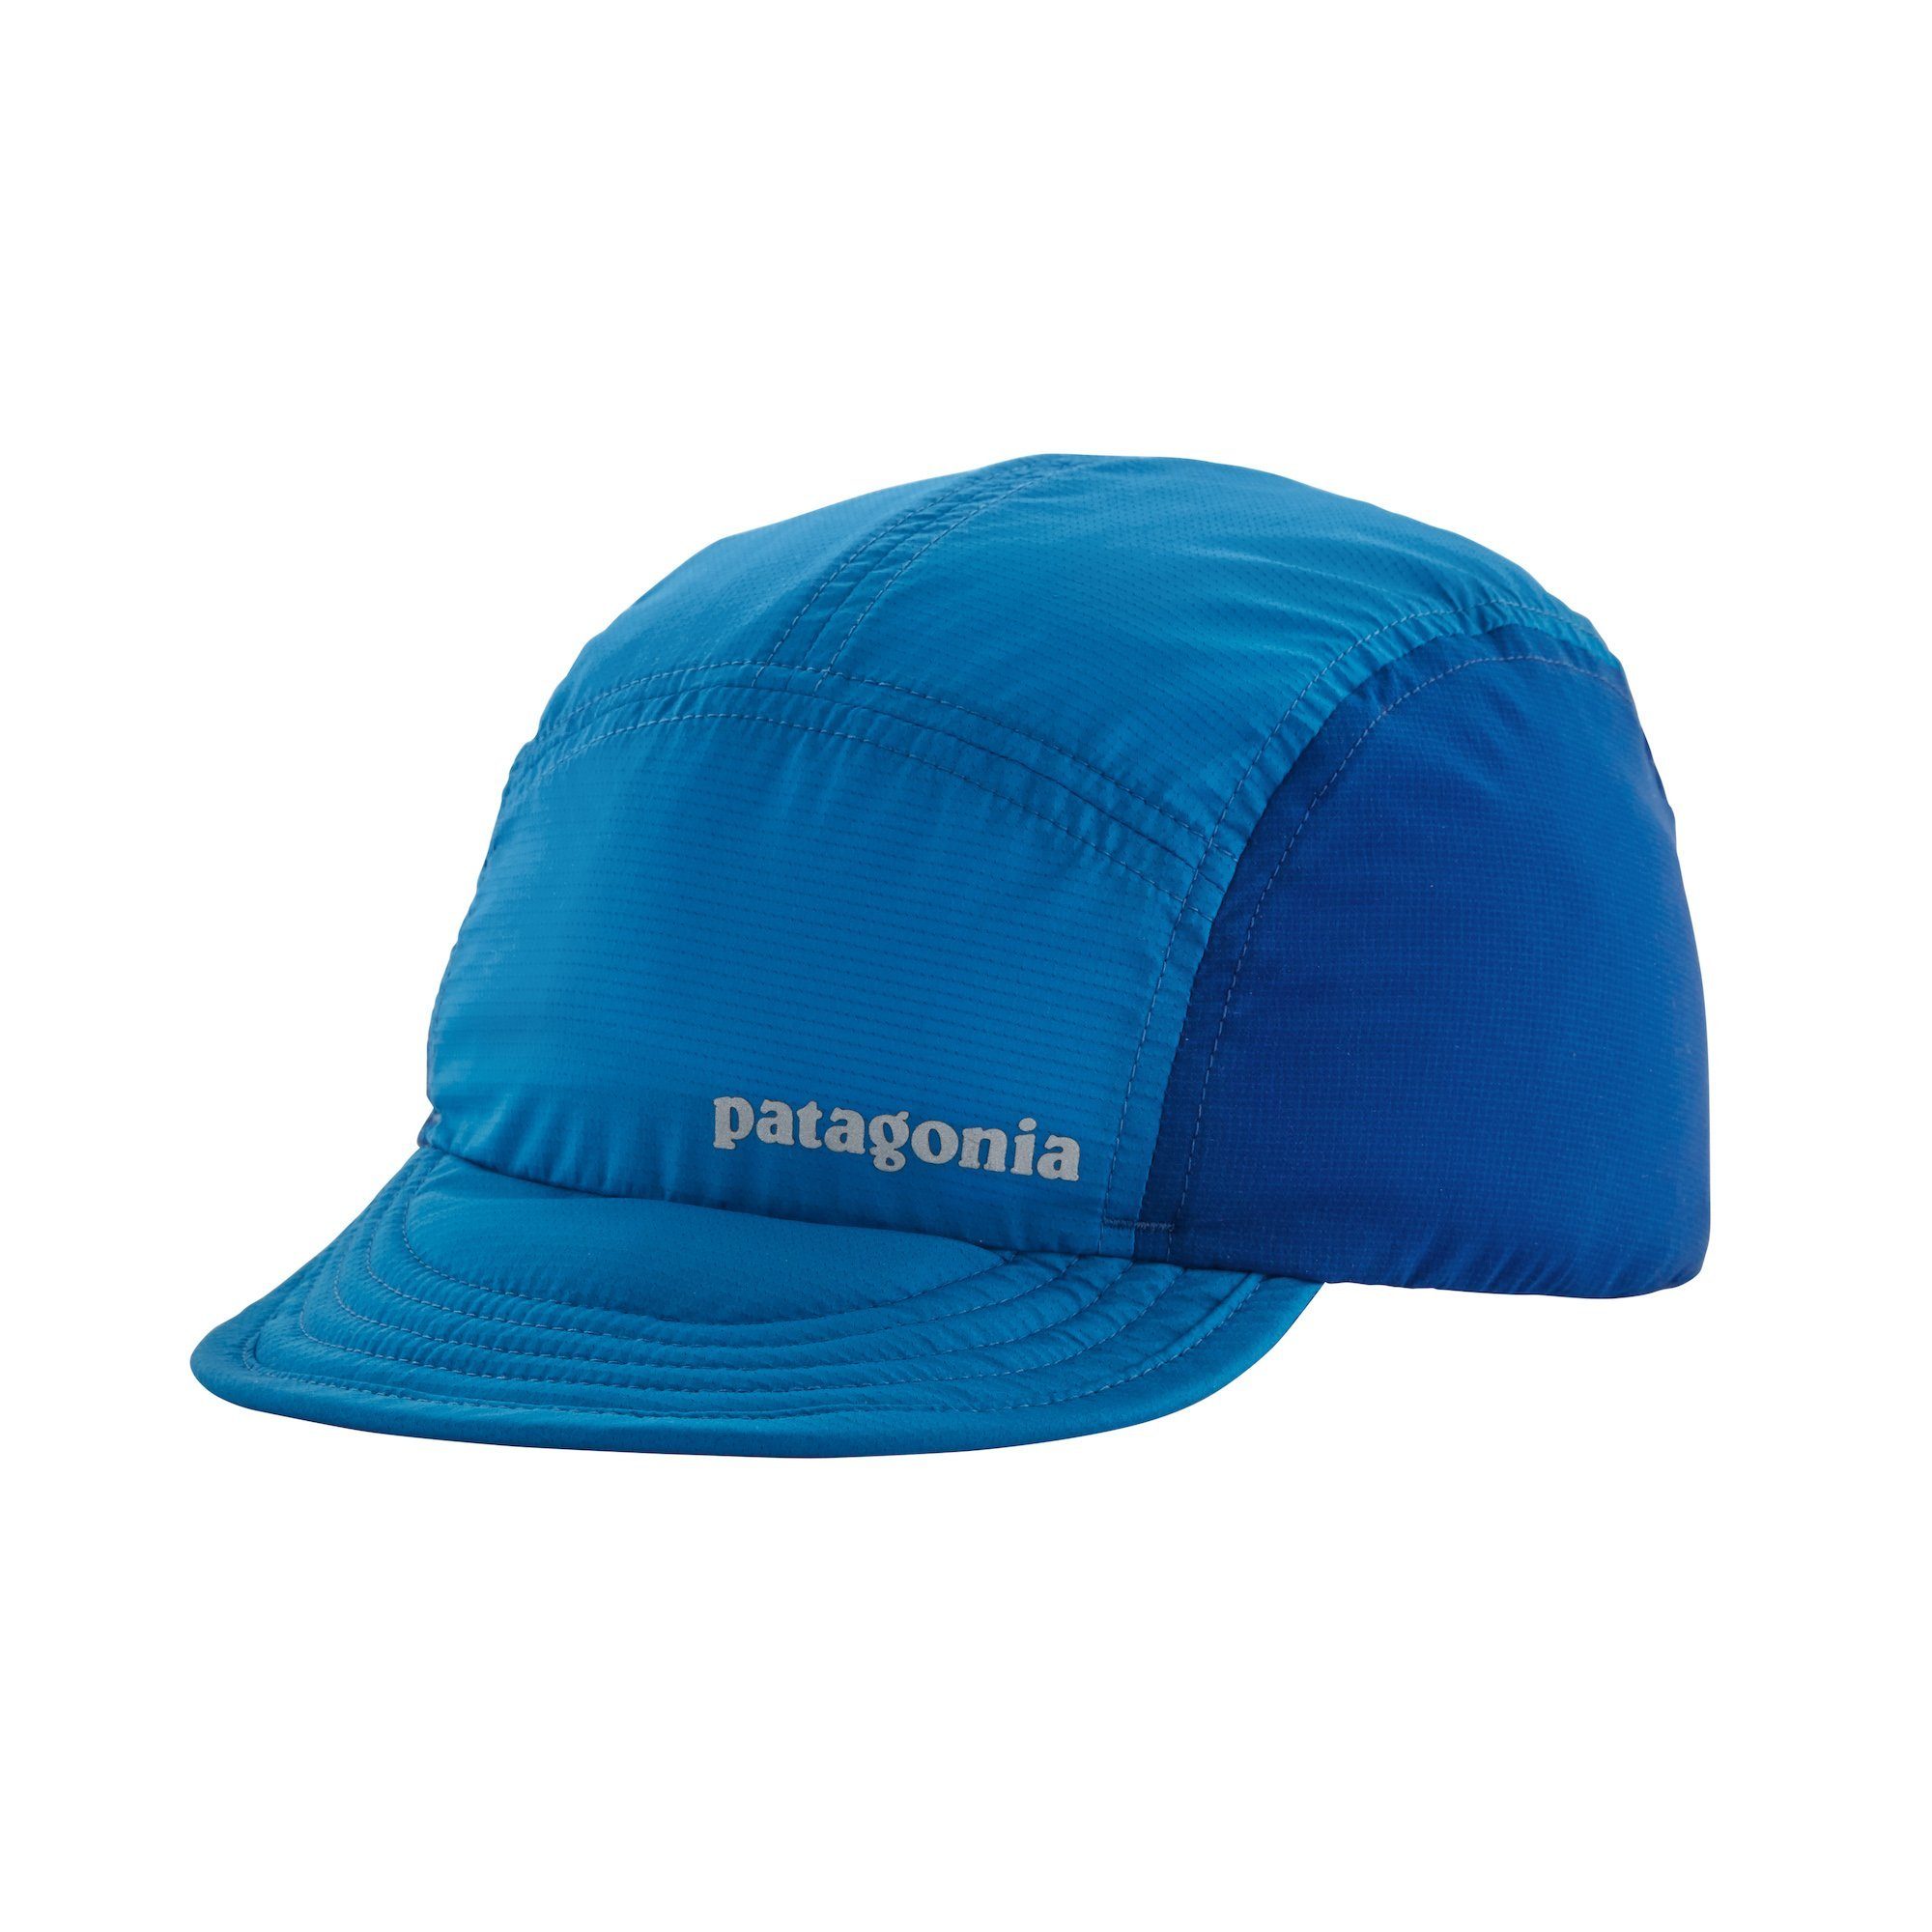 Patagonia Airdini Cap - Recycled Nylon, Andes Blue / S